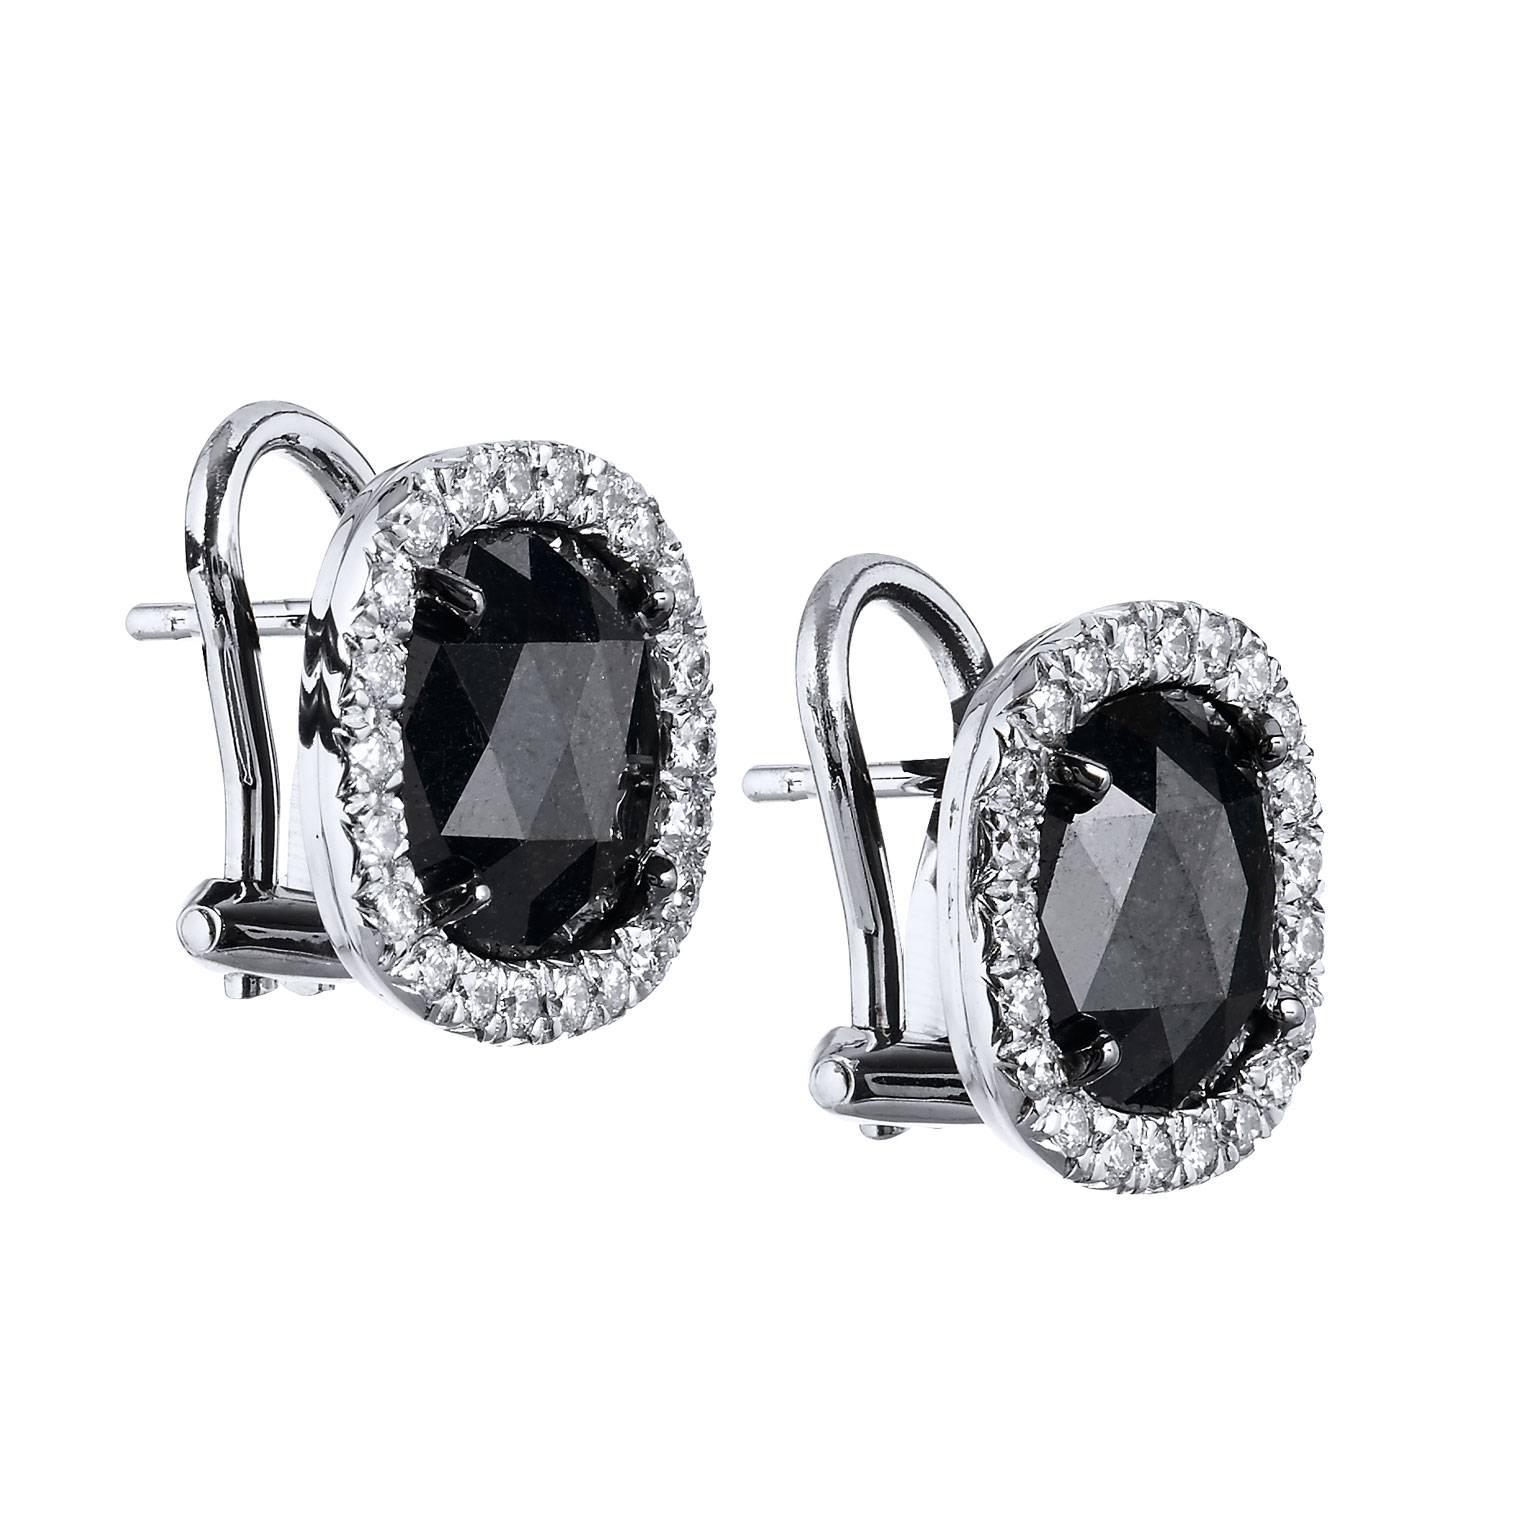 Opulence from the H&H Diamond Slice Collection, designed & hand made by H&H, in Eighteen Karat White Gold, with 5.10 carats of cushion shaped  faceted black diamonds, surrounded by forty four round brilliant cut diamonds with a total weight of .49